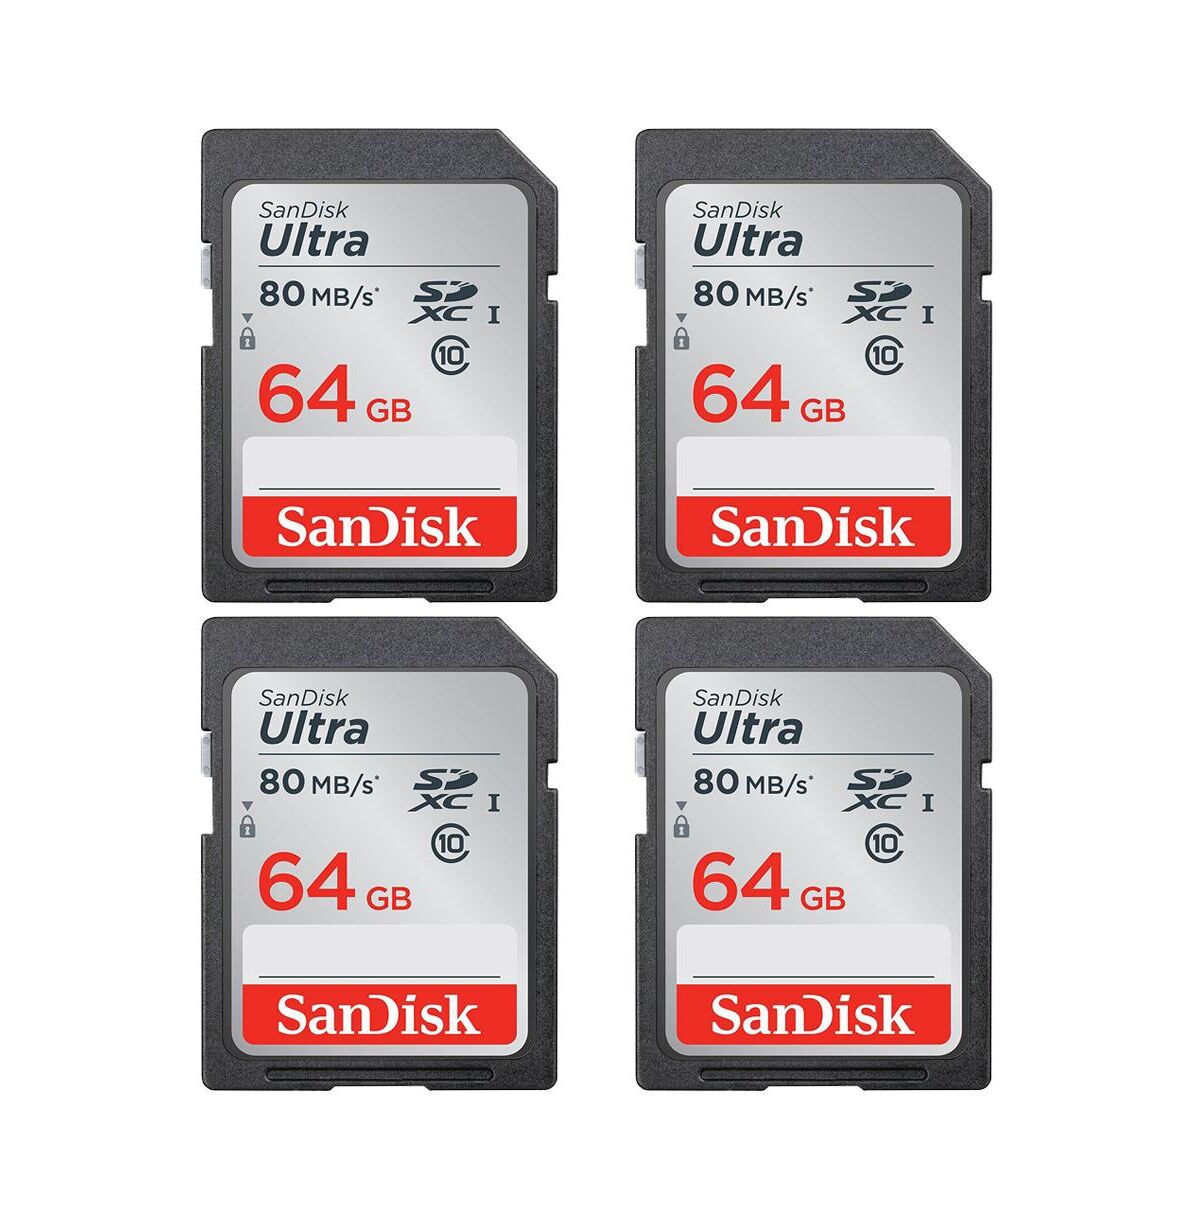 Sony Sandisk 64Gb Ultra Uhs-i Class 10 Sdxc Memory Cards (4-Pack) - Black